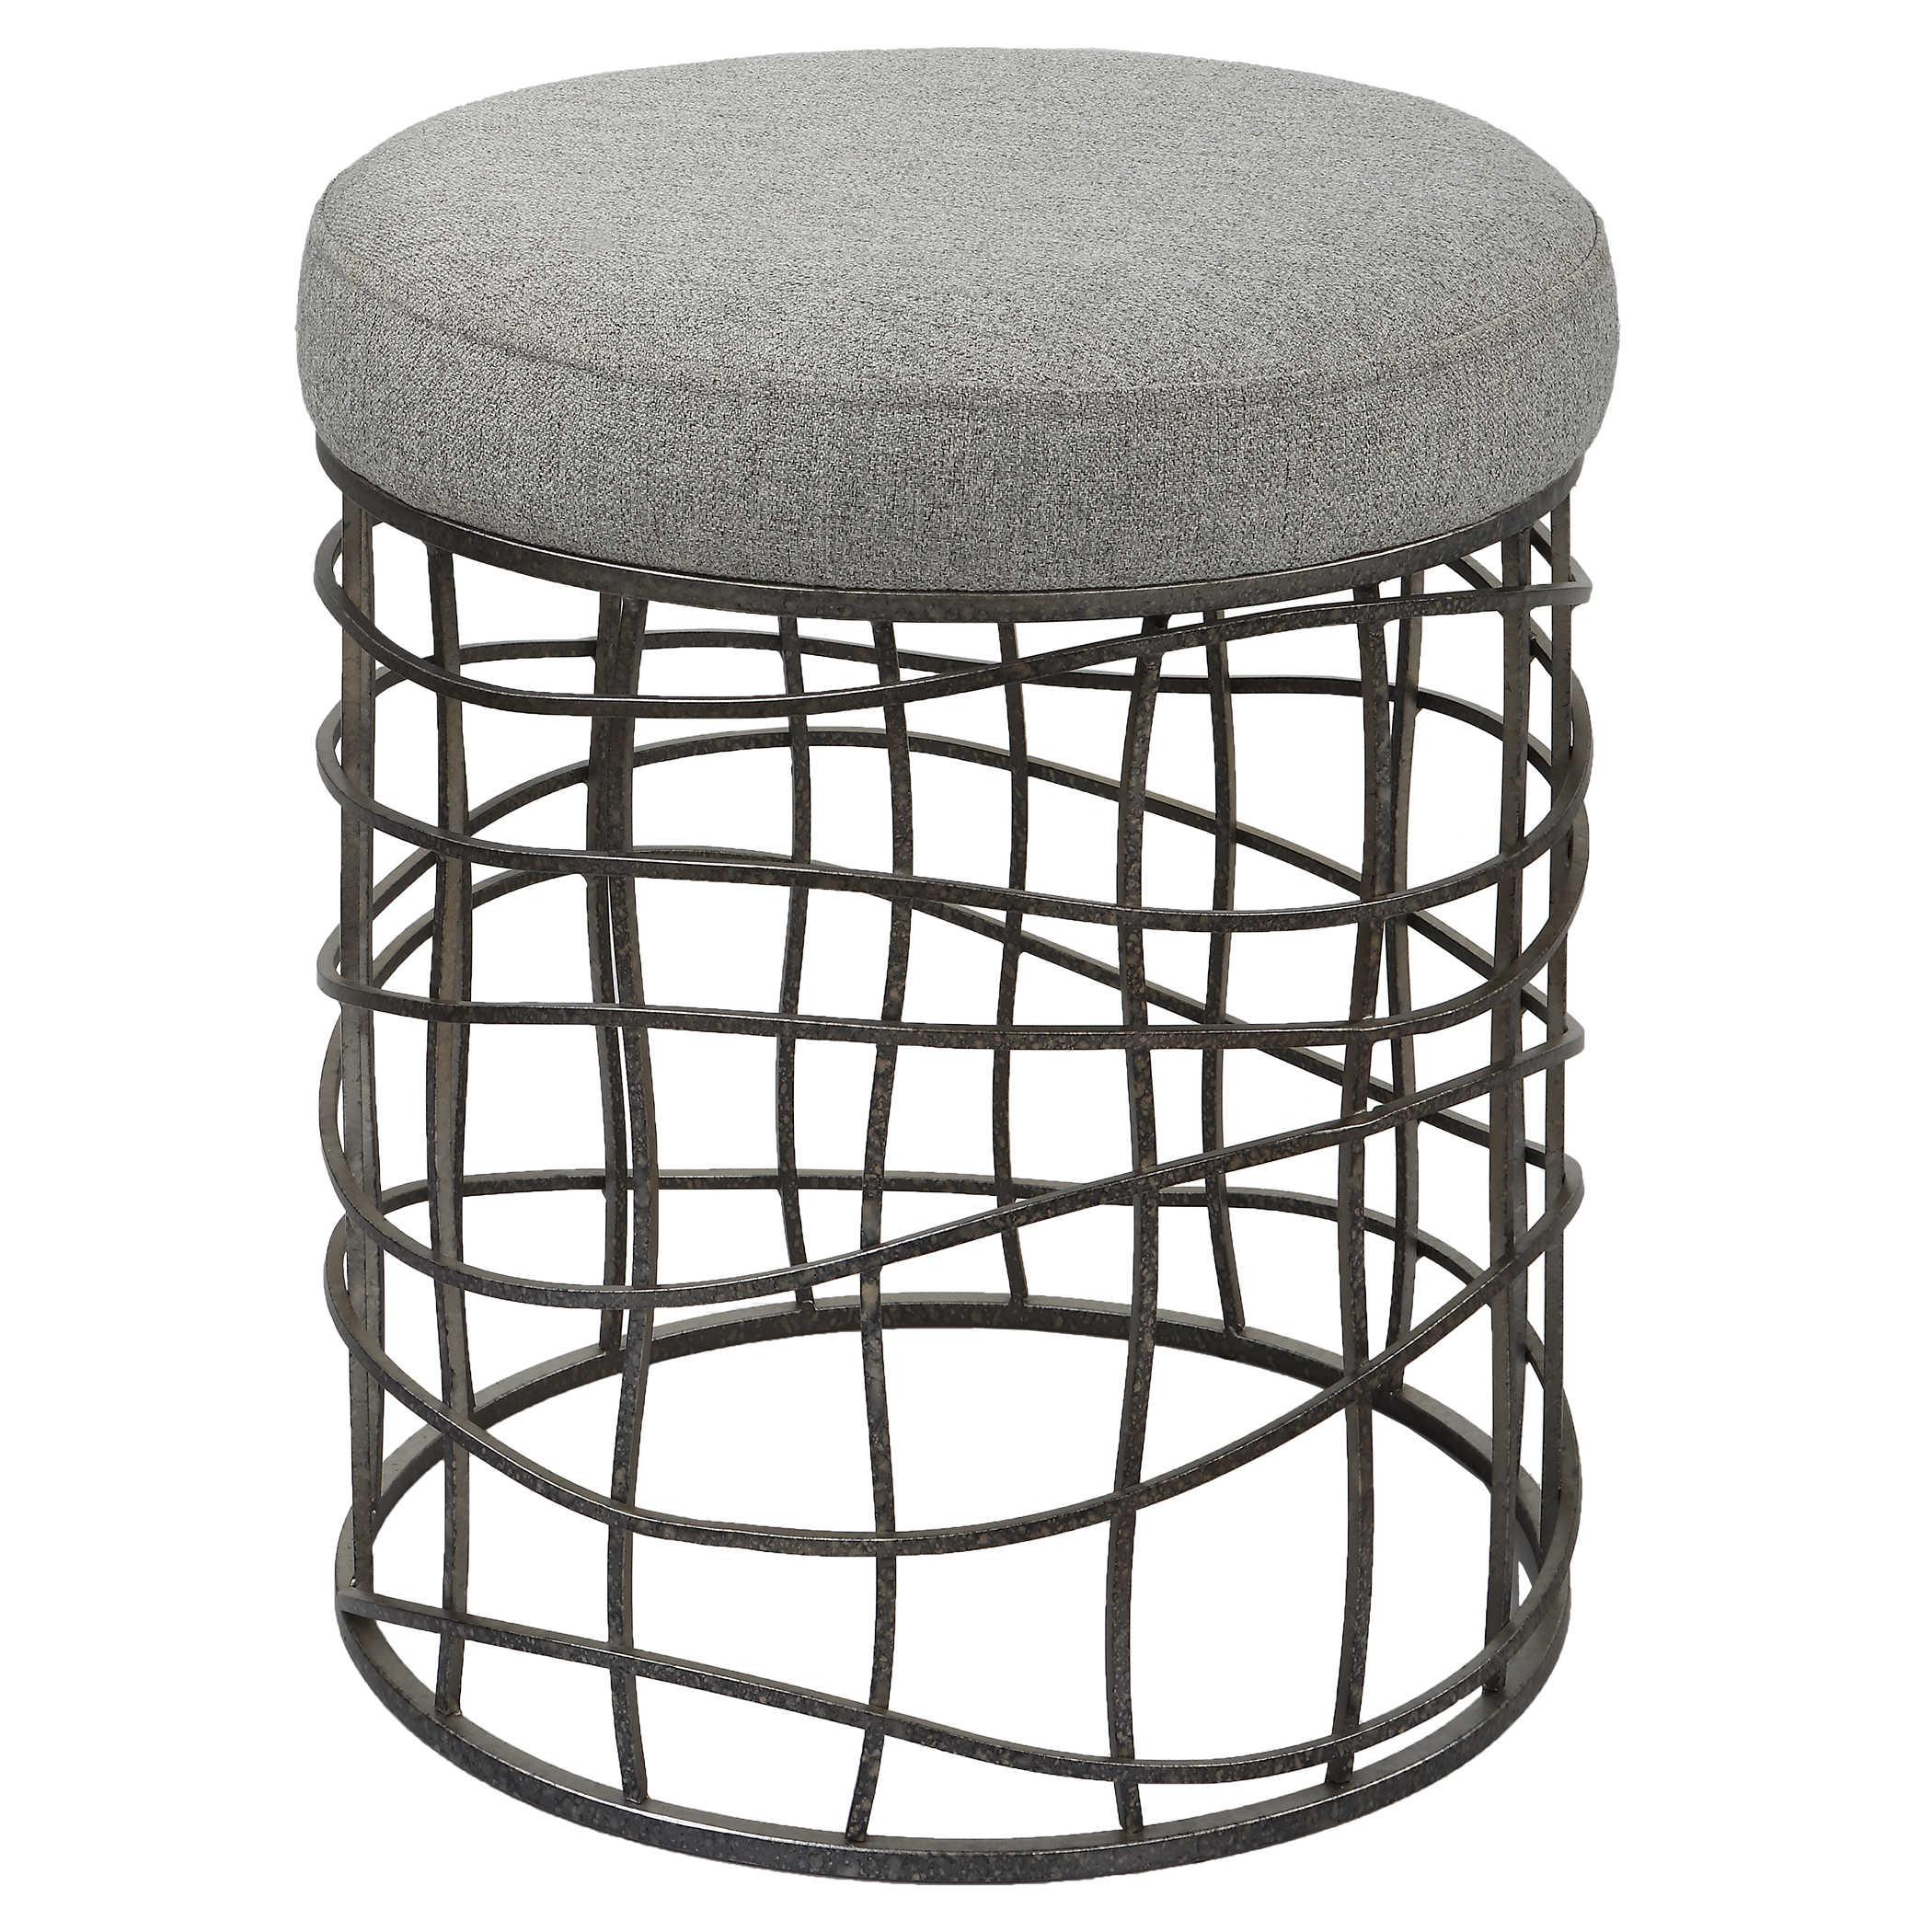 The Uttermost - Carnival Accent Stool - 23748 | Montreal Lighting & Hardware